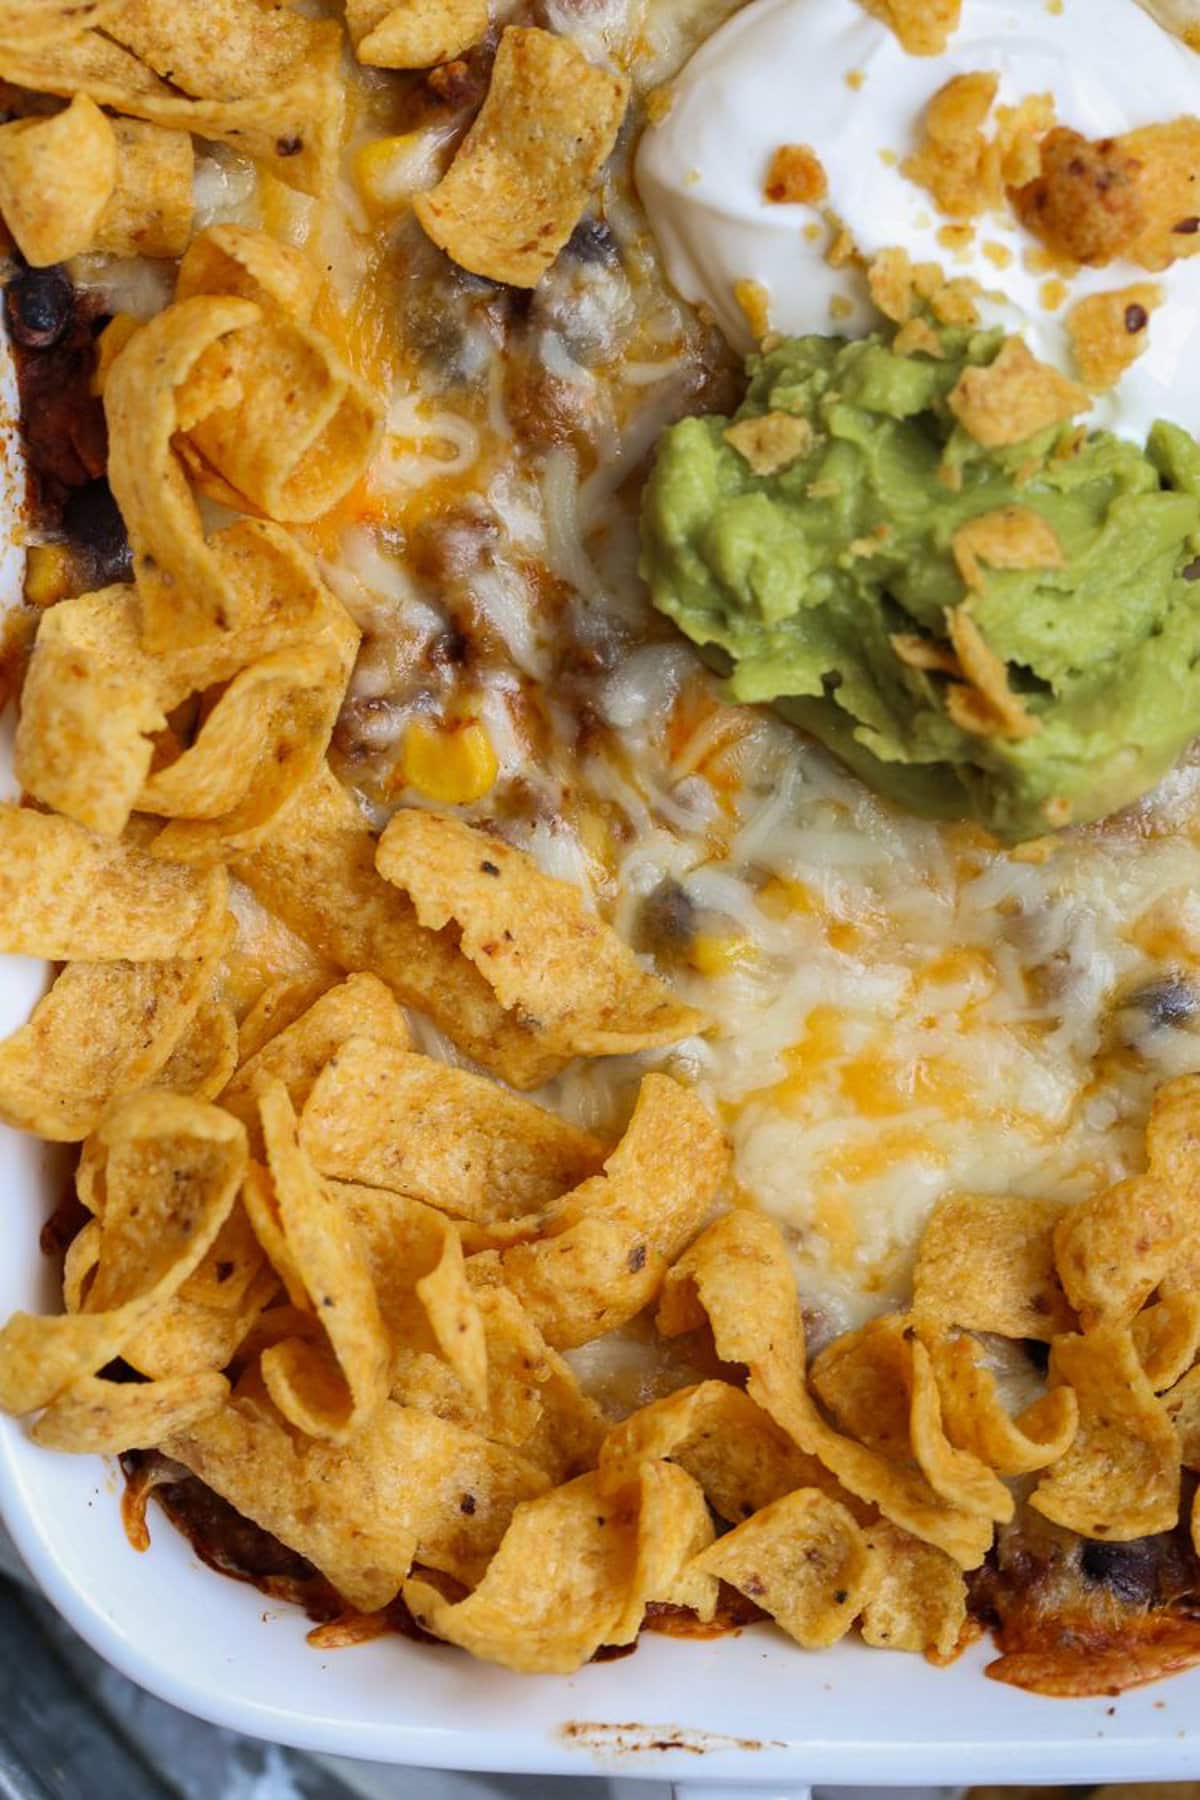 Frito pie with tex-mex toppings